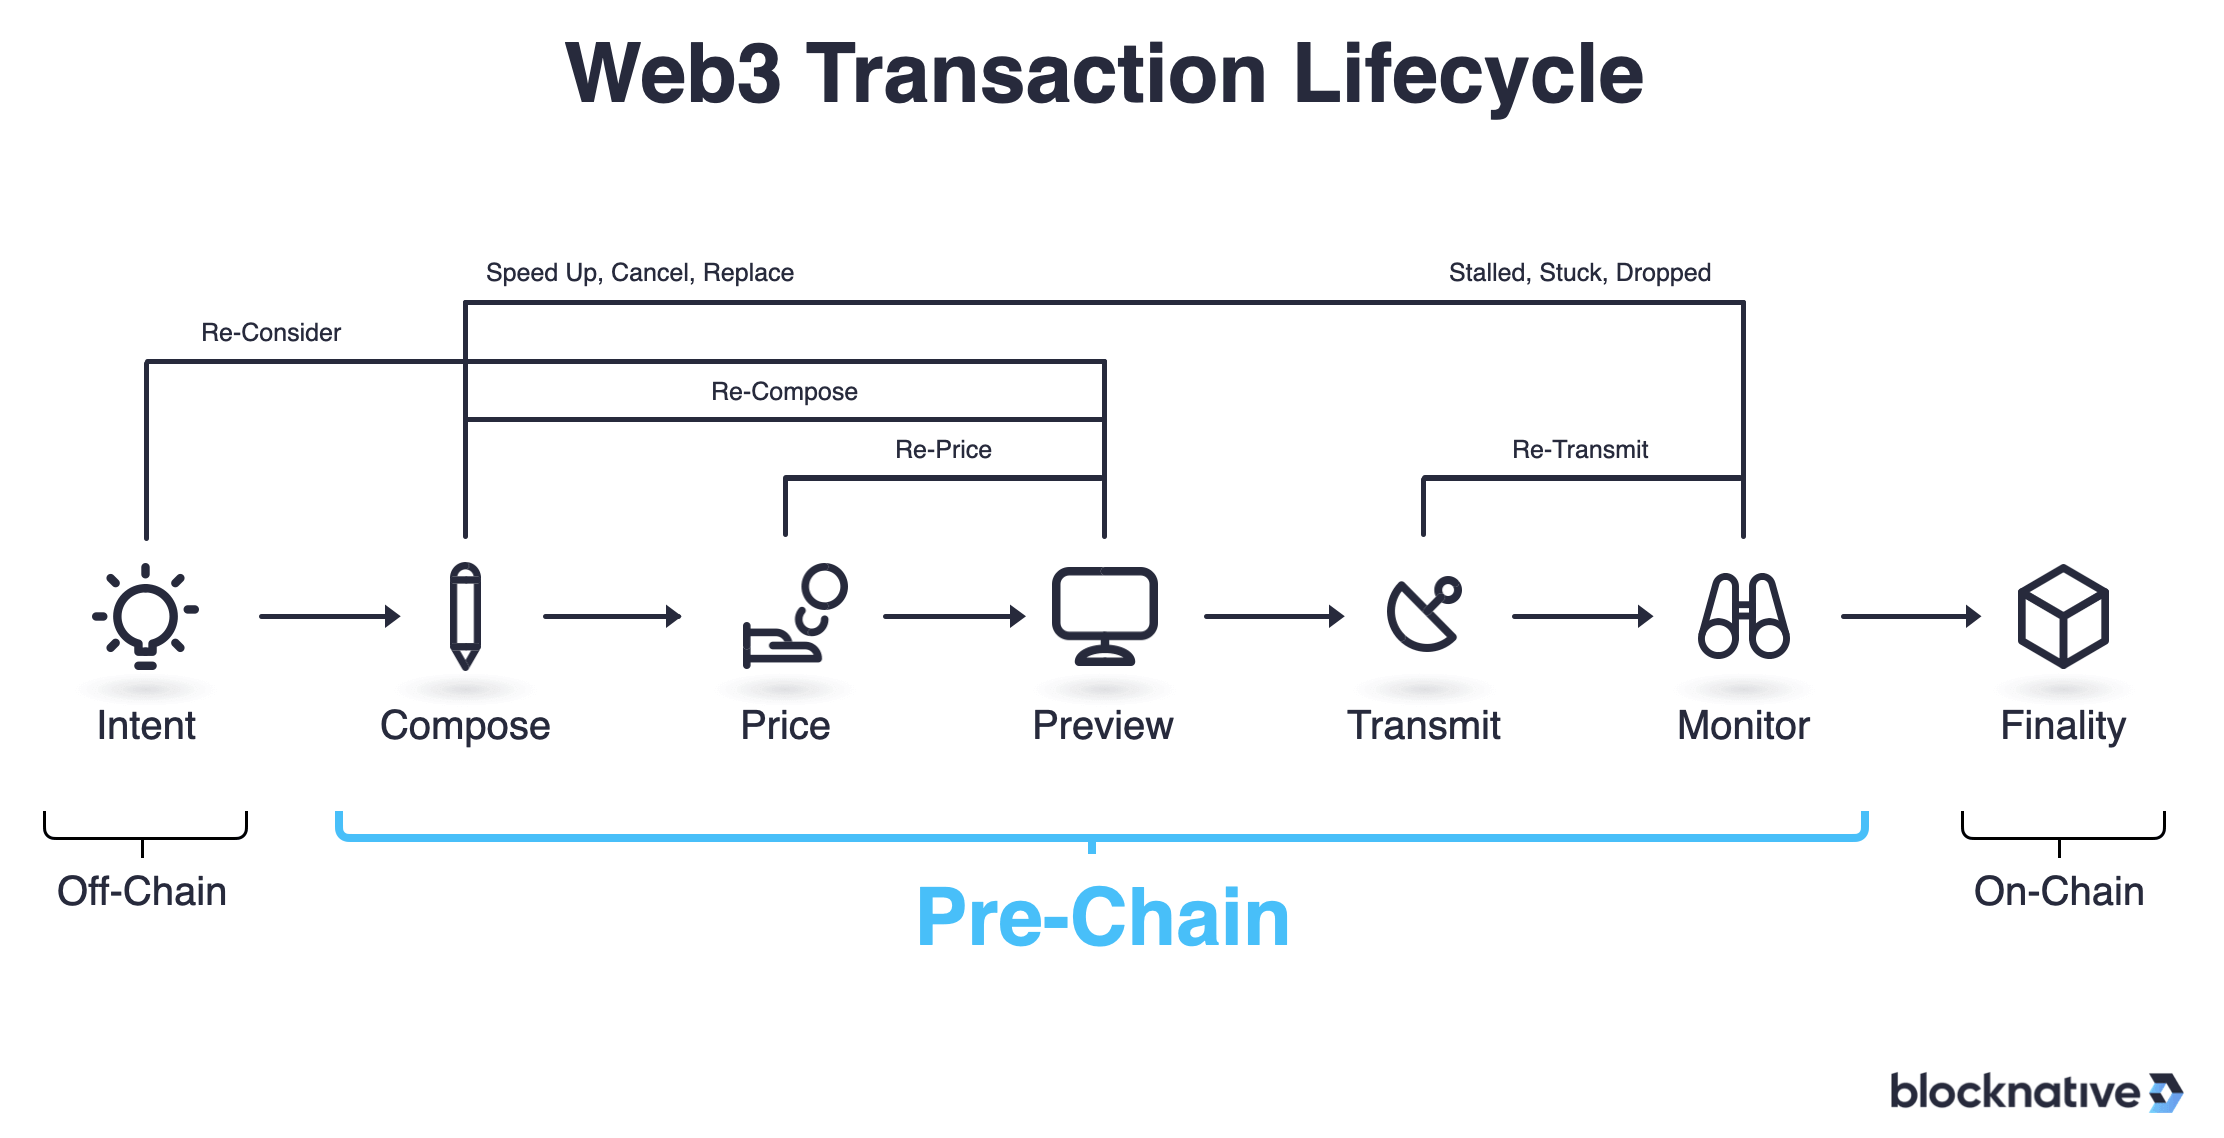 Pre-Chain Transaction Lifecycle